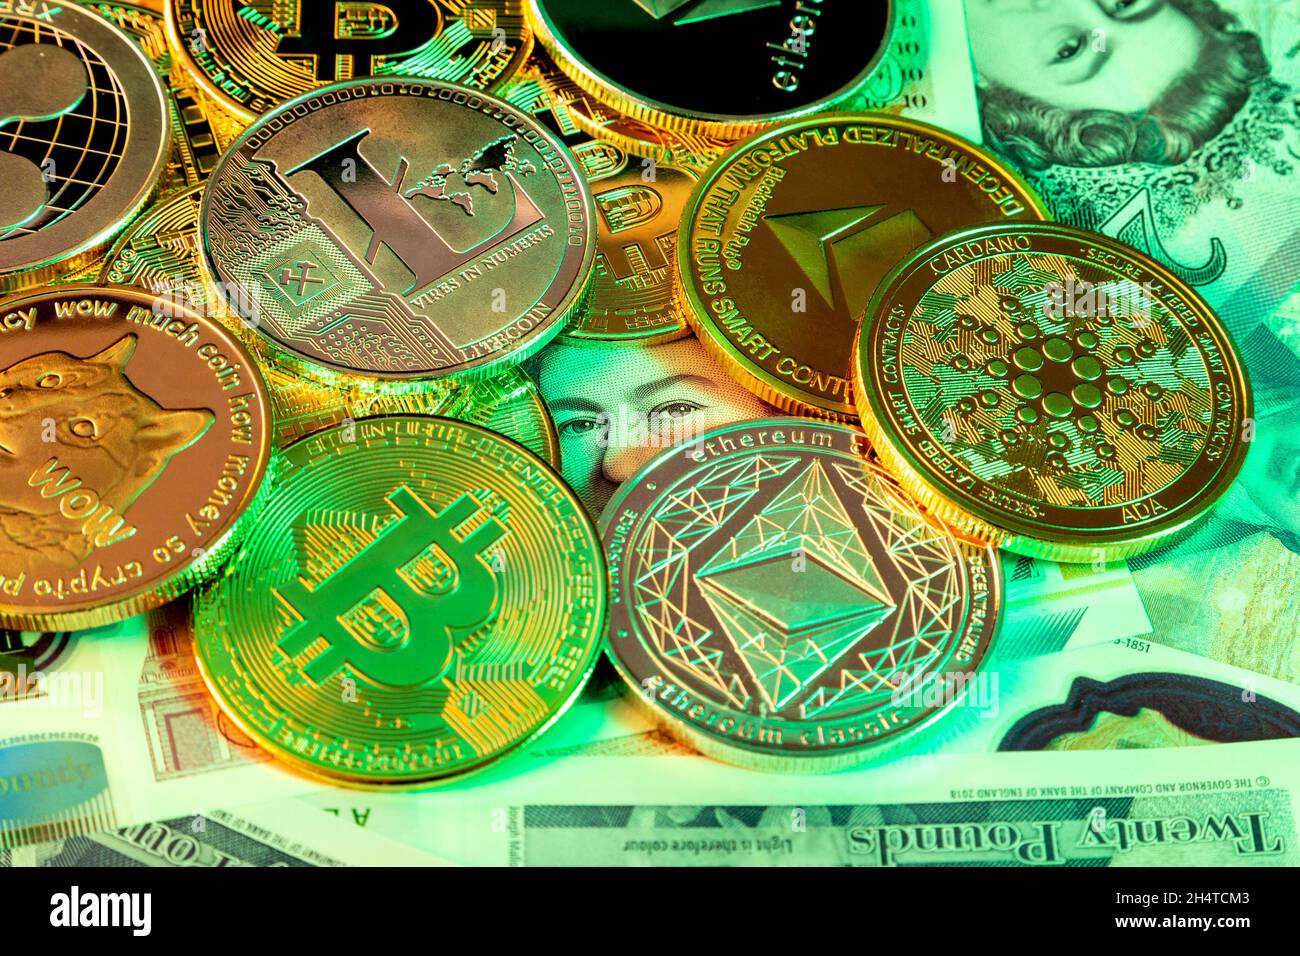 British pound notes covered by cryptocurrency coins, eyes peering through, threat to banks Stock Photo